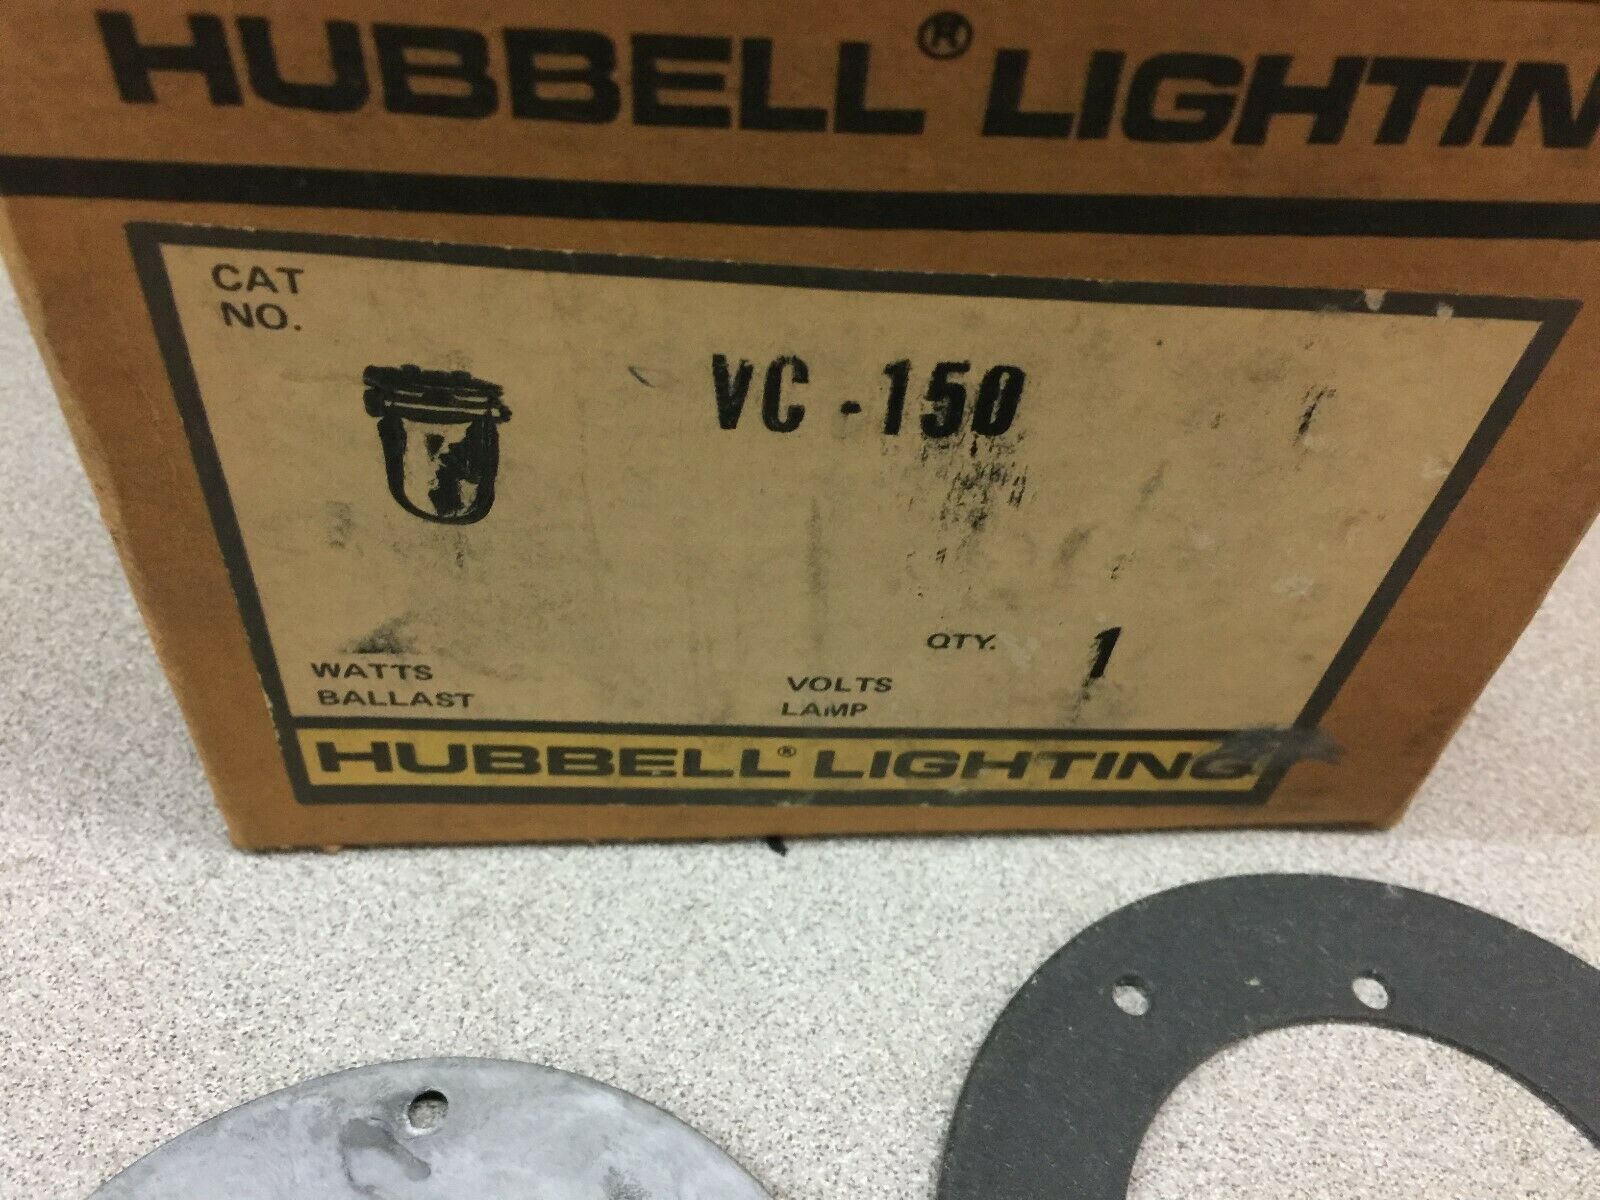 NEW IN BOX HUBBELL LIGHTING FIXTURE VC-150